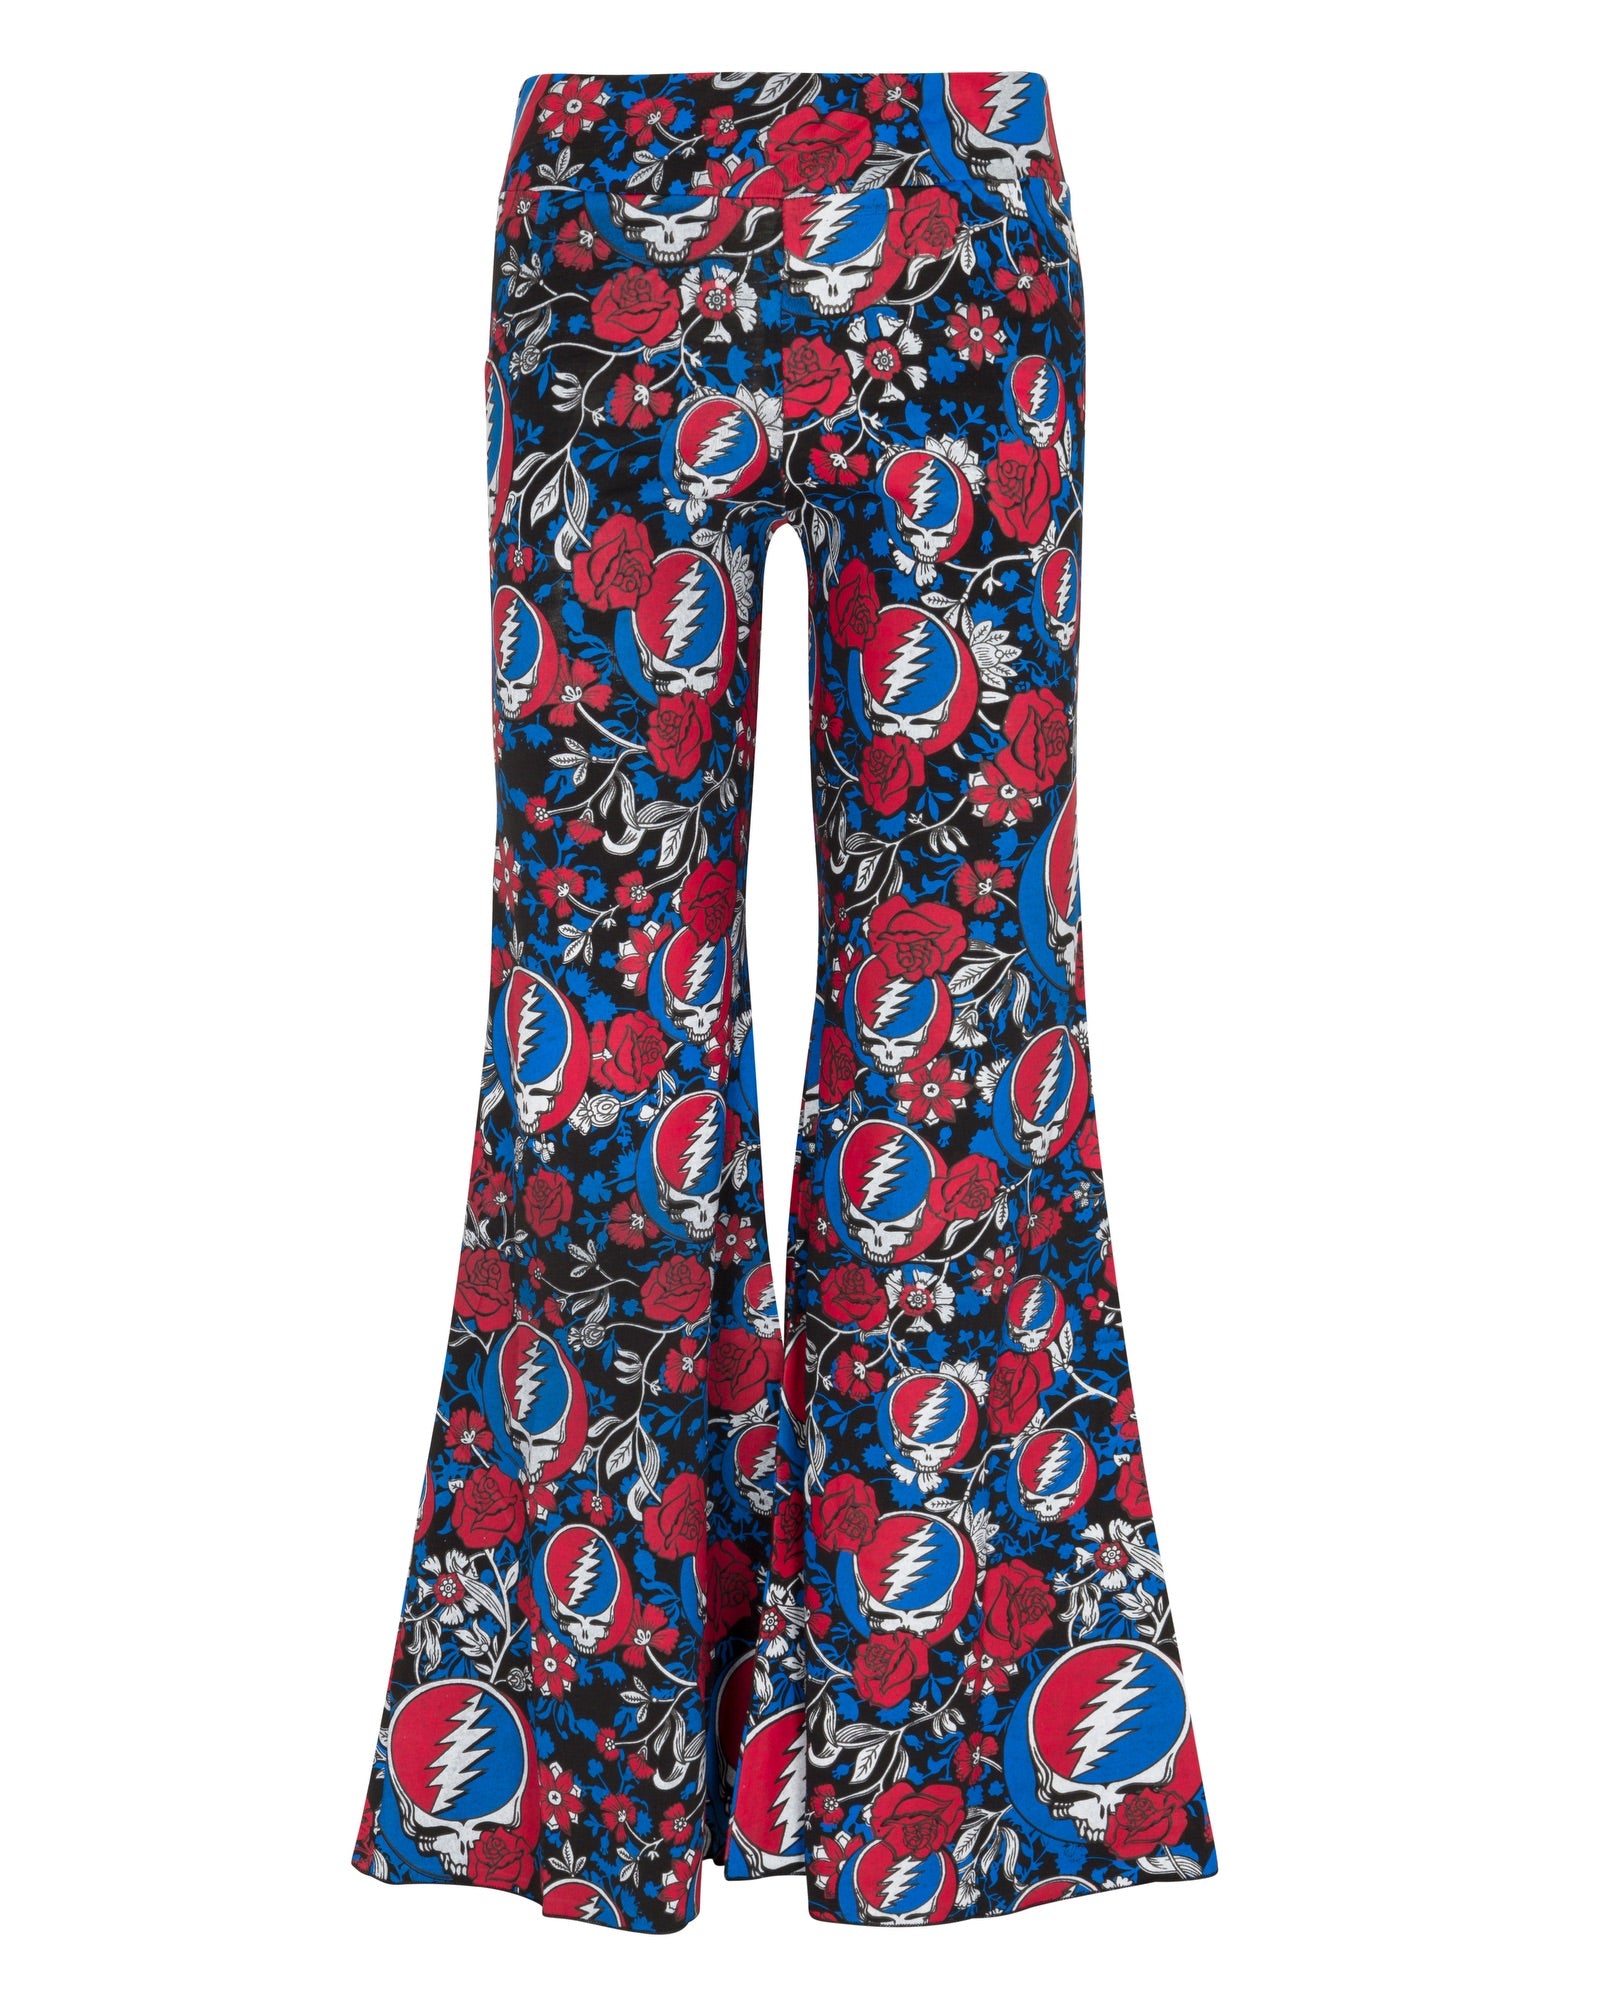 Grateful Dead High Rise Leggings Stealie In Red White And Blue